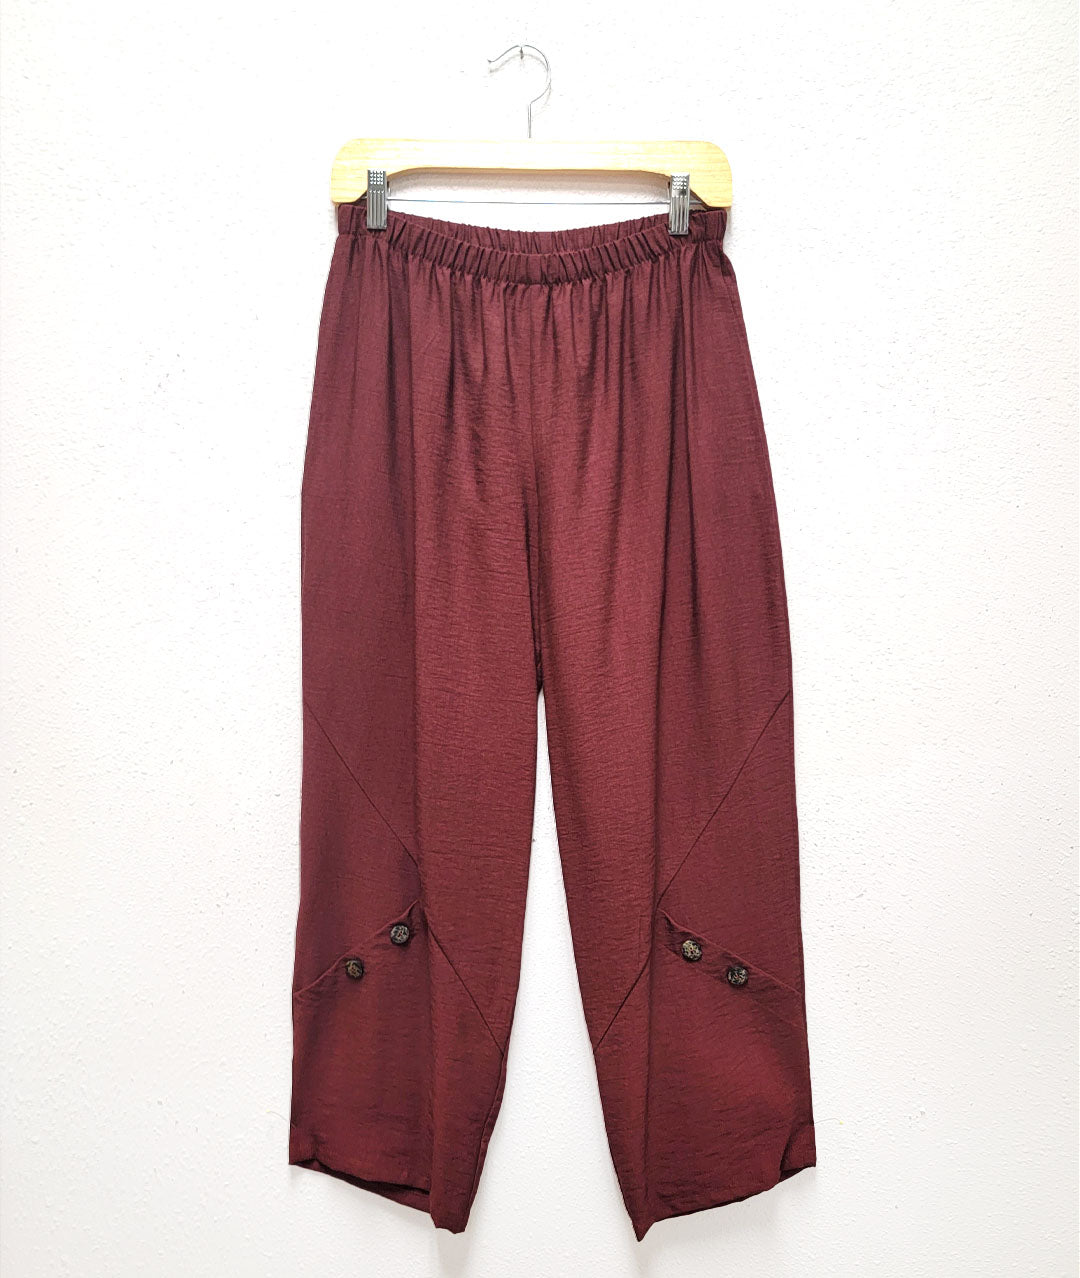 cinnamon color elastic waist pant with a button detail at the legs